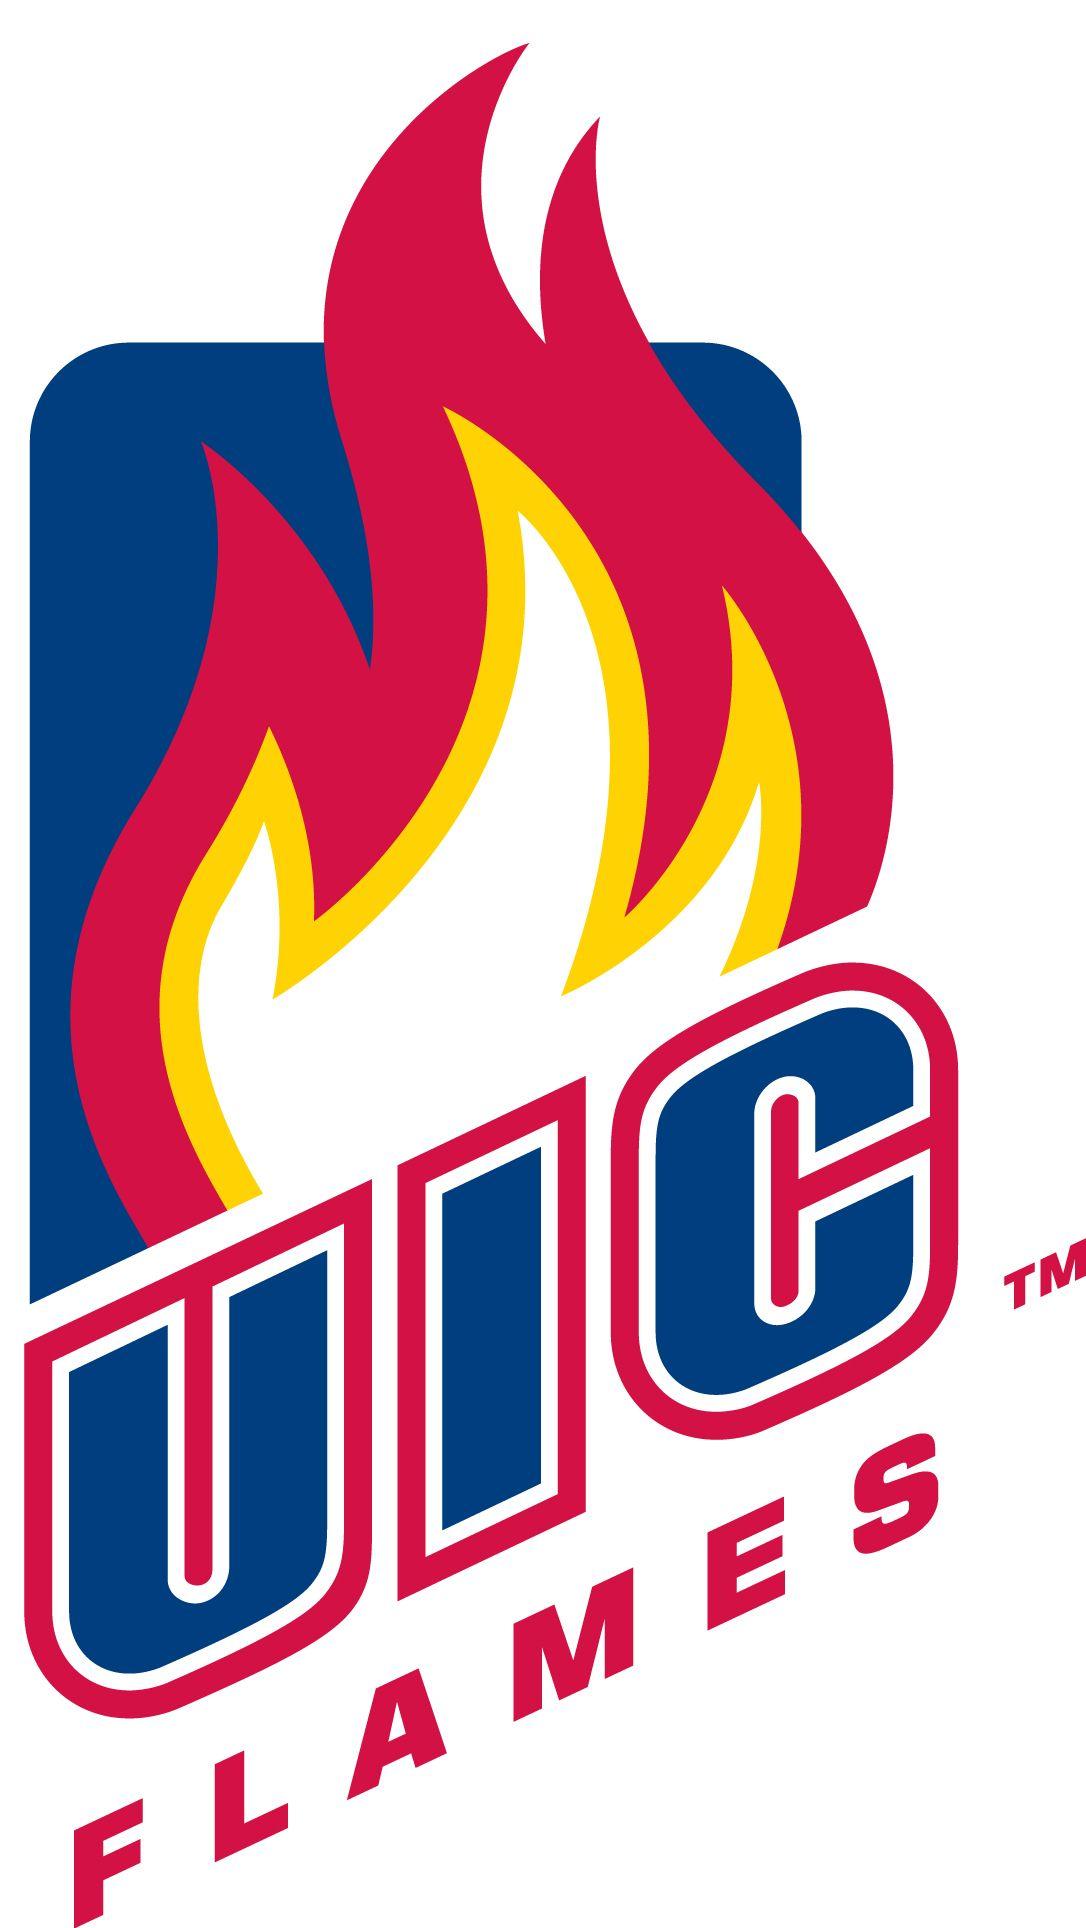 UIC Logo - The University of Illinois at Chicago, or UIC, is a state-funded ...